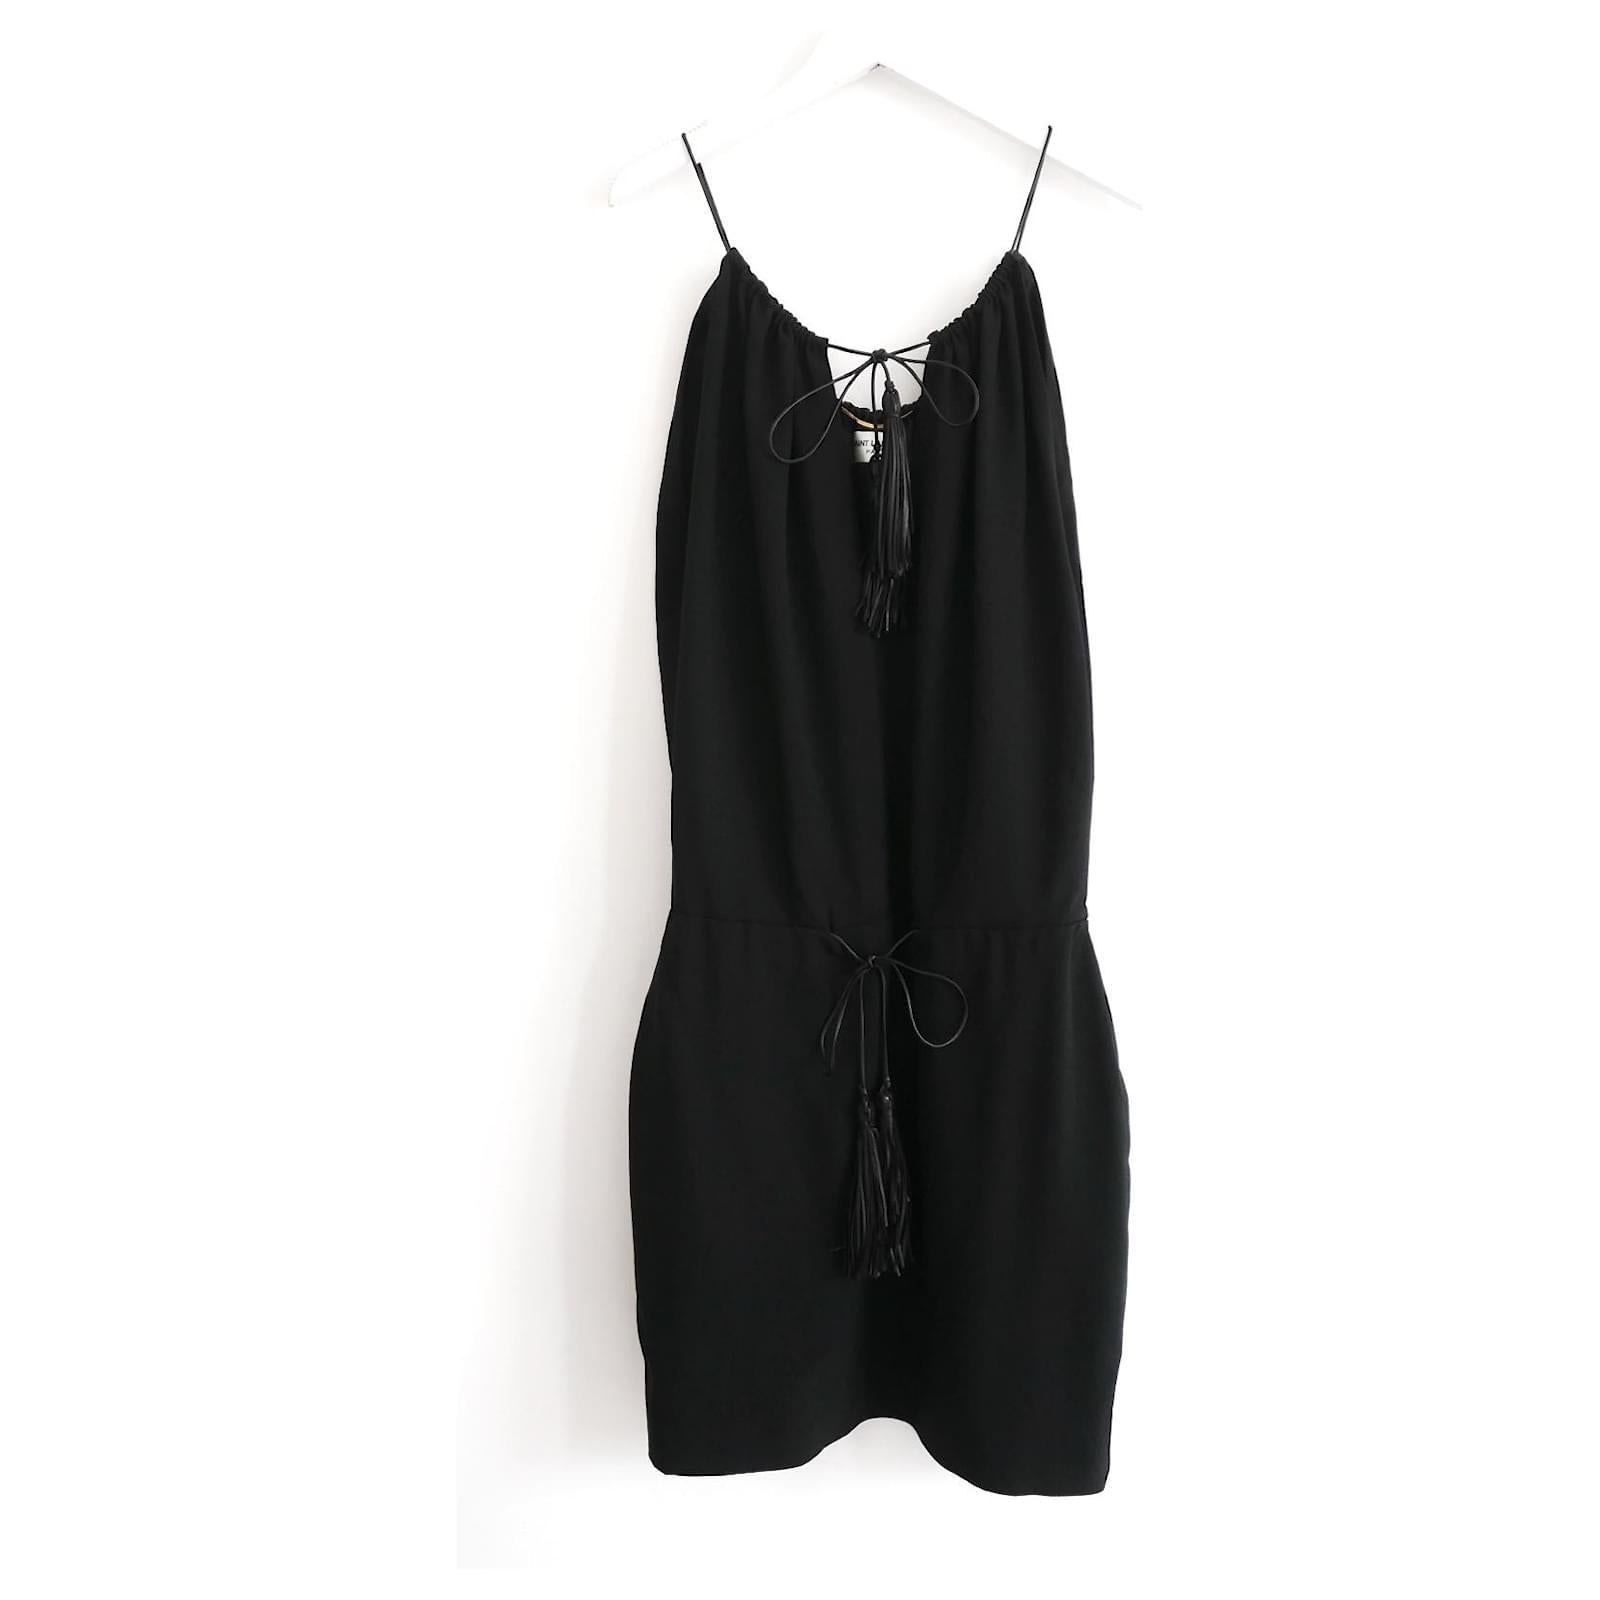 Signature 70s inspired party dress from Saint Laurent. Bought for €2850 and new with tag. Made from black acetate mix crepe with leather tassel ties to neck and waist. Has a loose fit bodice and fitted skirt. lined in silk. Size FR34/UK6 and will